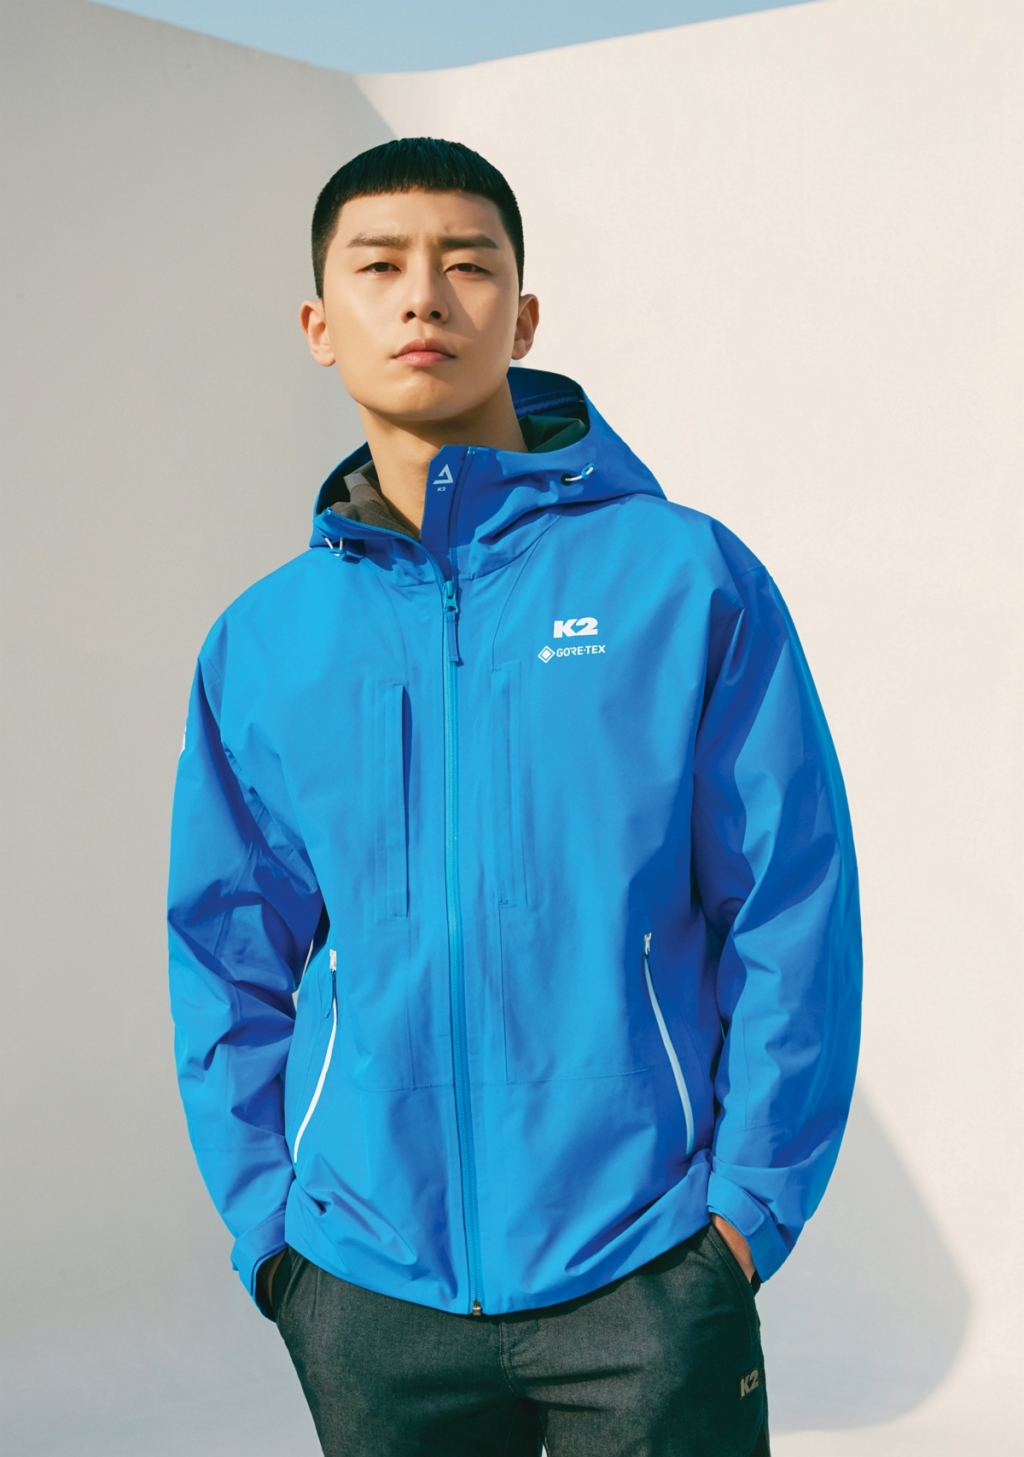 Outdoor brand K2 announced on November 11 that Actor Park Seo-joon was selected as a brand exclusive Model.K2 said that the healthy Image of Actor Park Seo-joon, who has a variety of fans regardless of generation with bright and positive energy, is well matched with the K2 brand Image and selected as a new face.Park Seo-joon will show a Tech Plus line for hiking and light hiking, and a Life line look that reflects functional lifestyle wear and athletic trends.It will show an active yet sensual look.Park Seo-joon will start his activities as a full-fledged K2 Model starting with the release of the picture in March.Park Seo-joons healthy and active Image has been selected as a Model in line with the K2 brand Image, said Shin Seon-cheol, head of the K2 marketing team. I expect that Park Seo-joons charm of eight colors, which plays a variety of genres, will bring newness and fresh vitality to K2.On the other hand, Park Seo-joon is playing the role of Park Sae-roi in JTBC gilt Drama ItaeOne Clath.